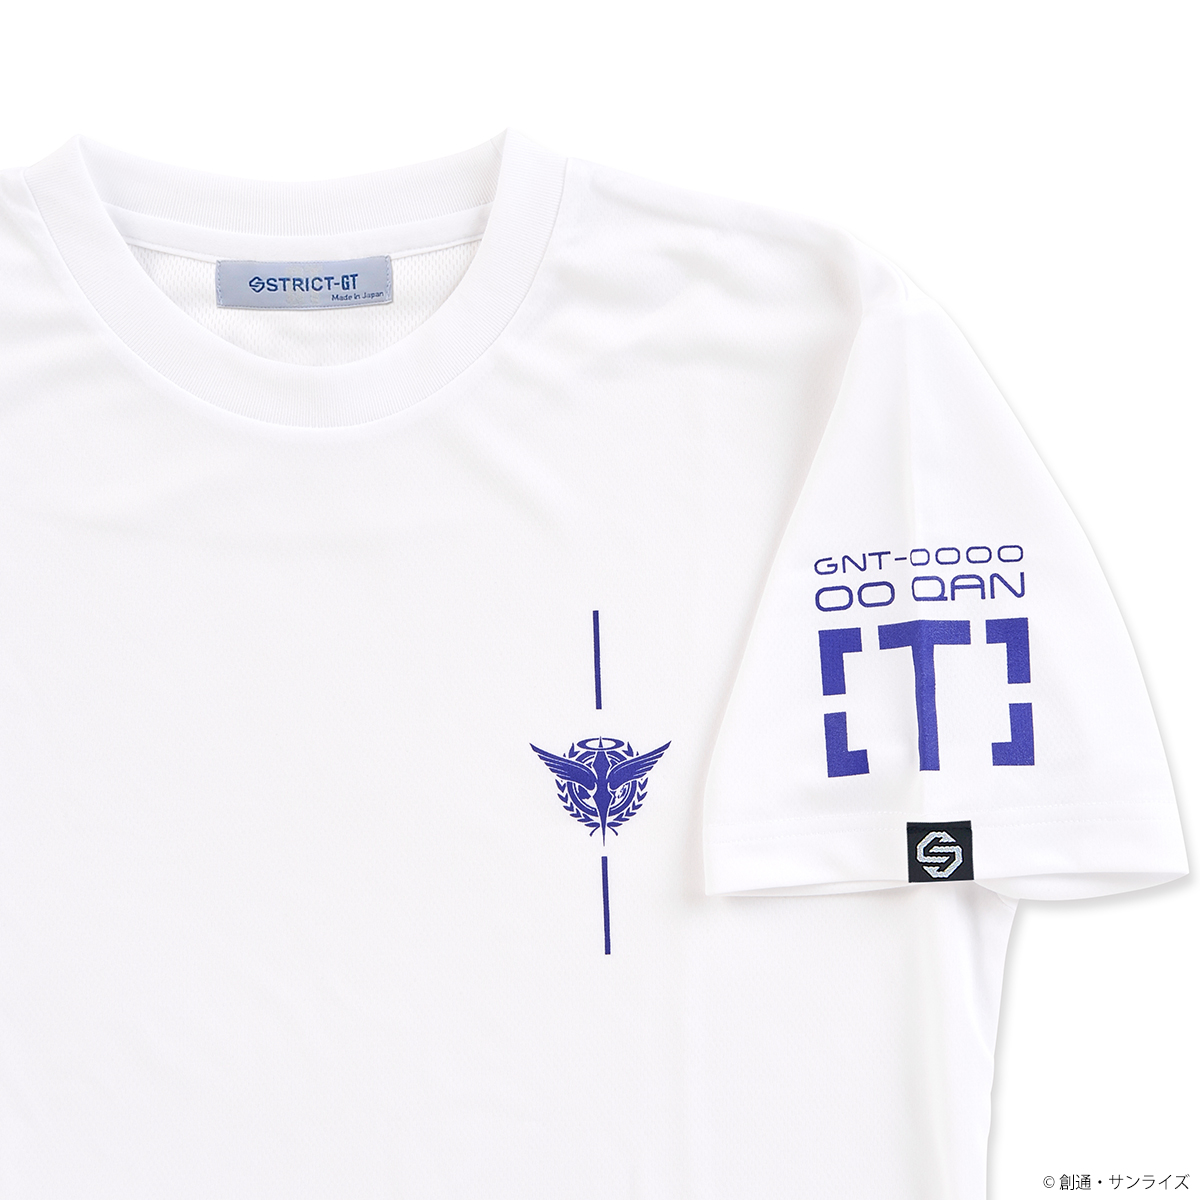 00 Qan[T] Quick-Drying T-shirt—Mobile Suit Gundam 00 the Movie -A wakening of the Trailblazer-/STRICT-G Collaboration